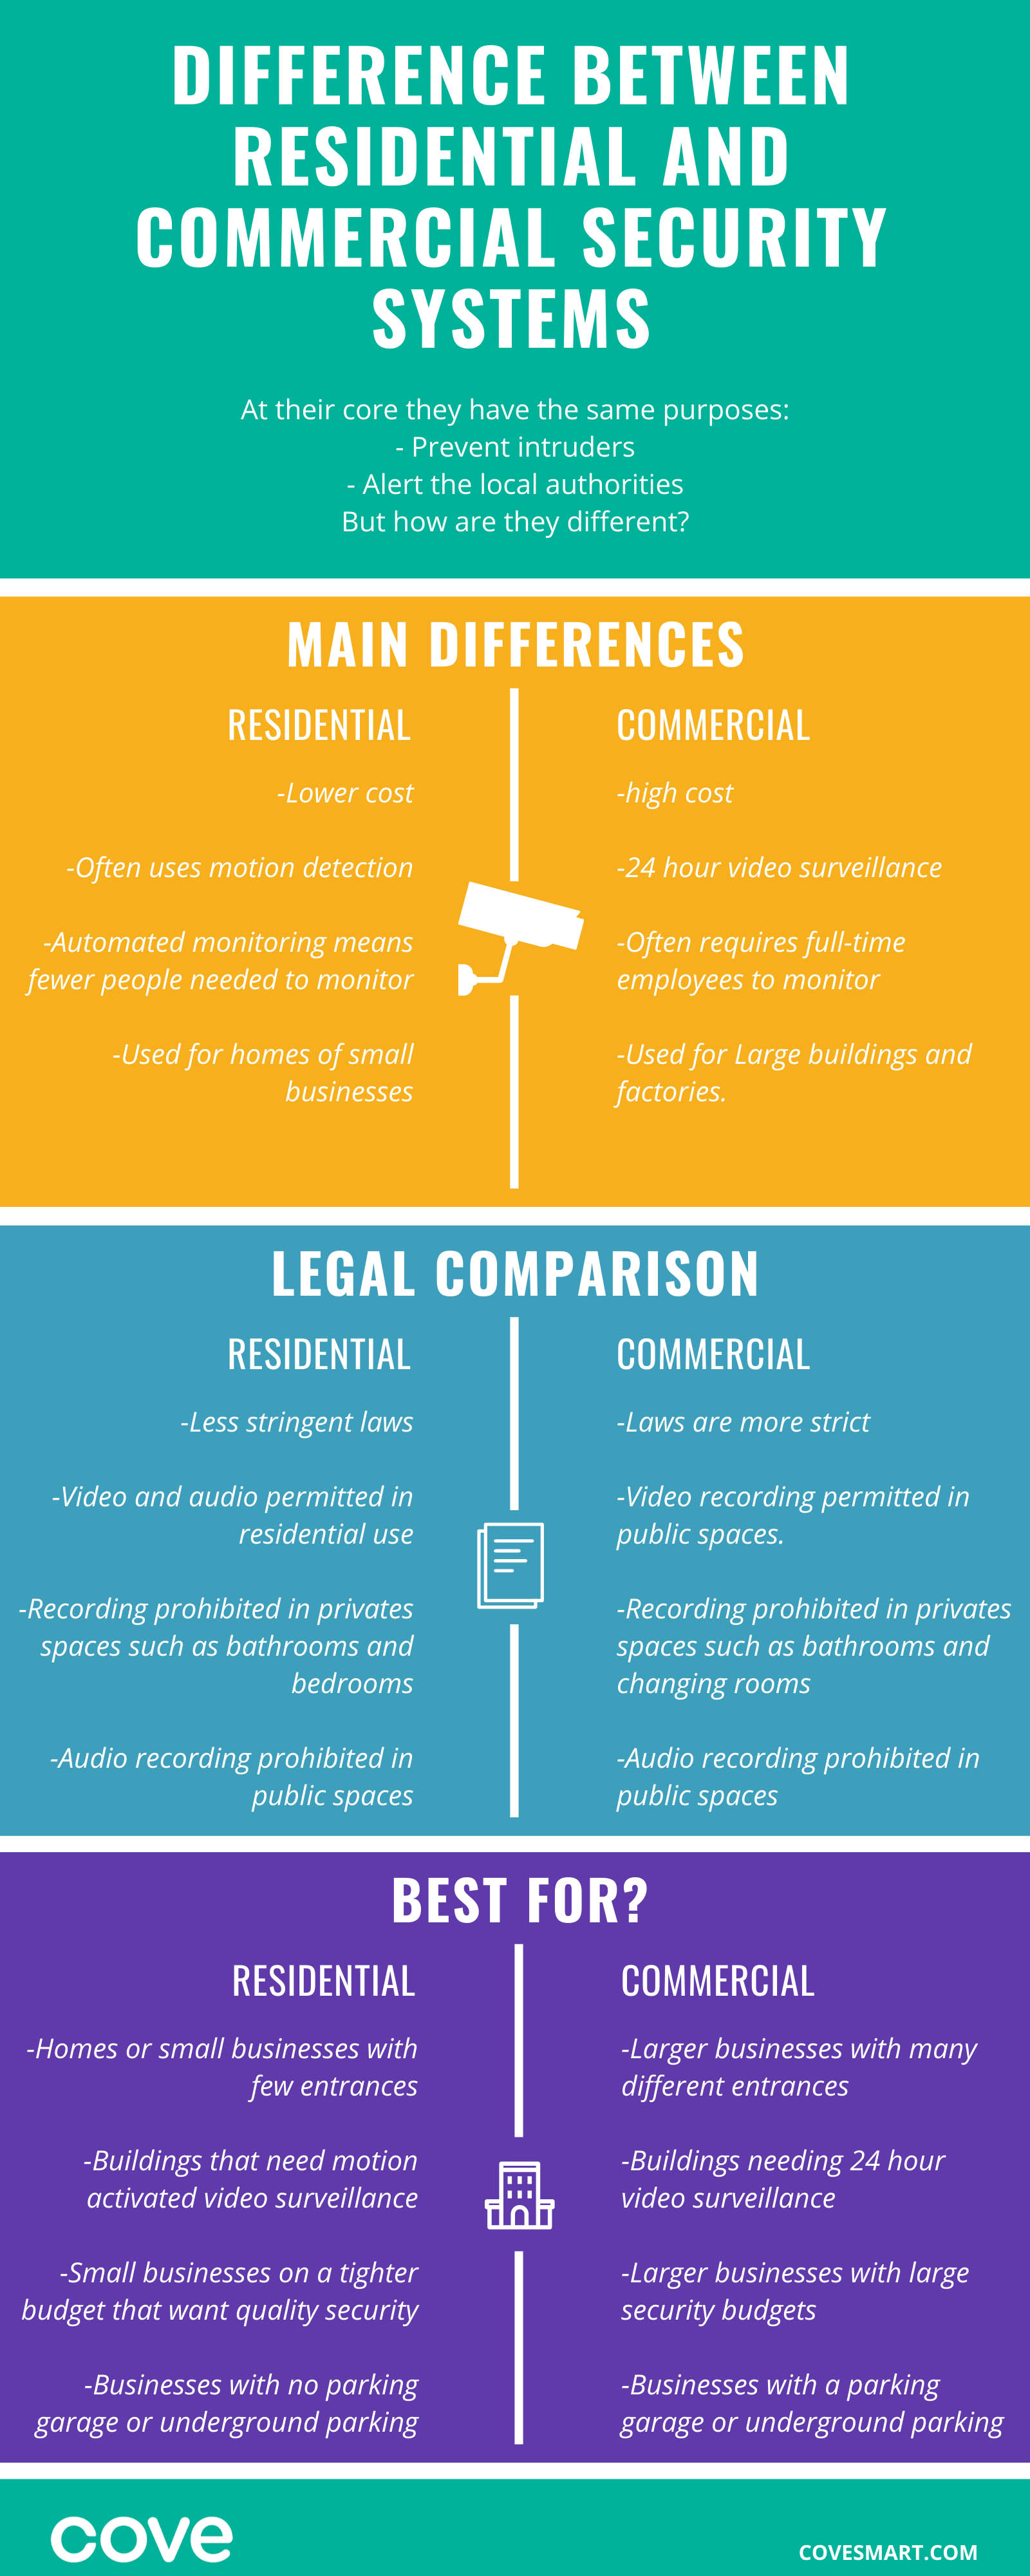 Infographic: Comparing the differences between Residential and Commercial Security